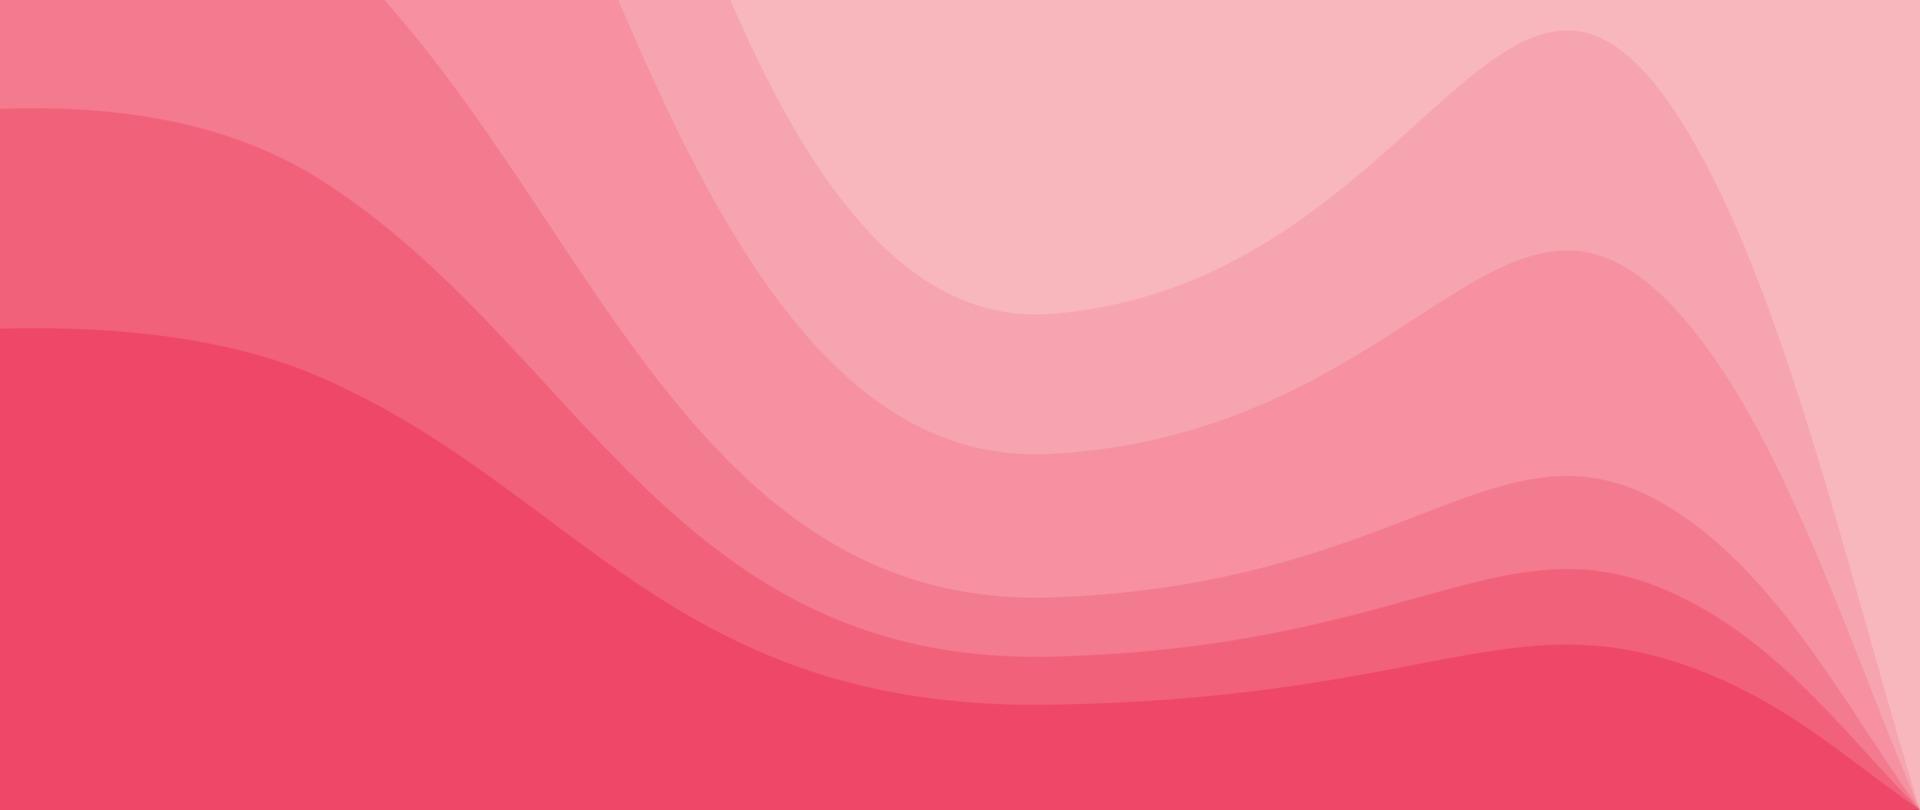 pink monochrome background abstract vector